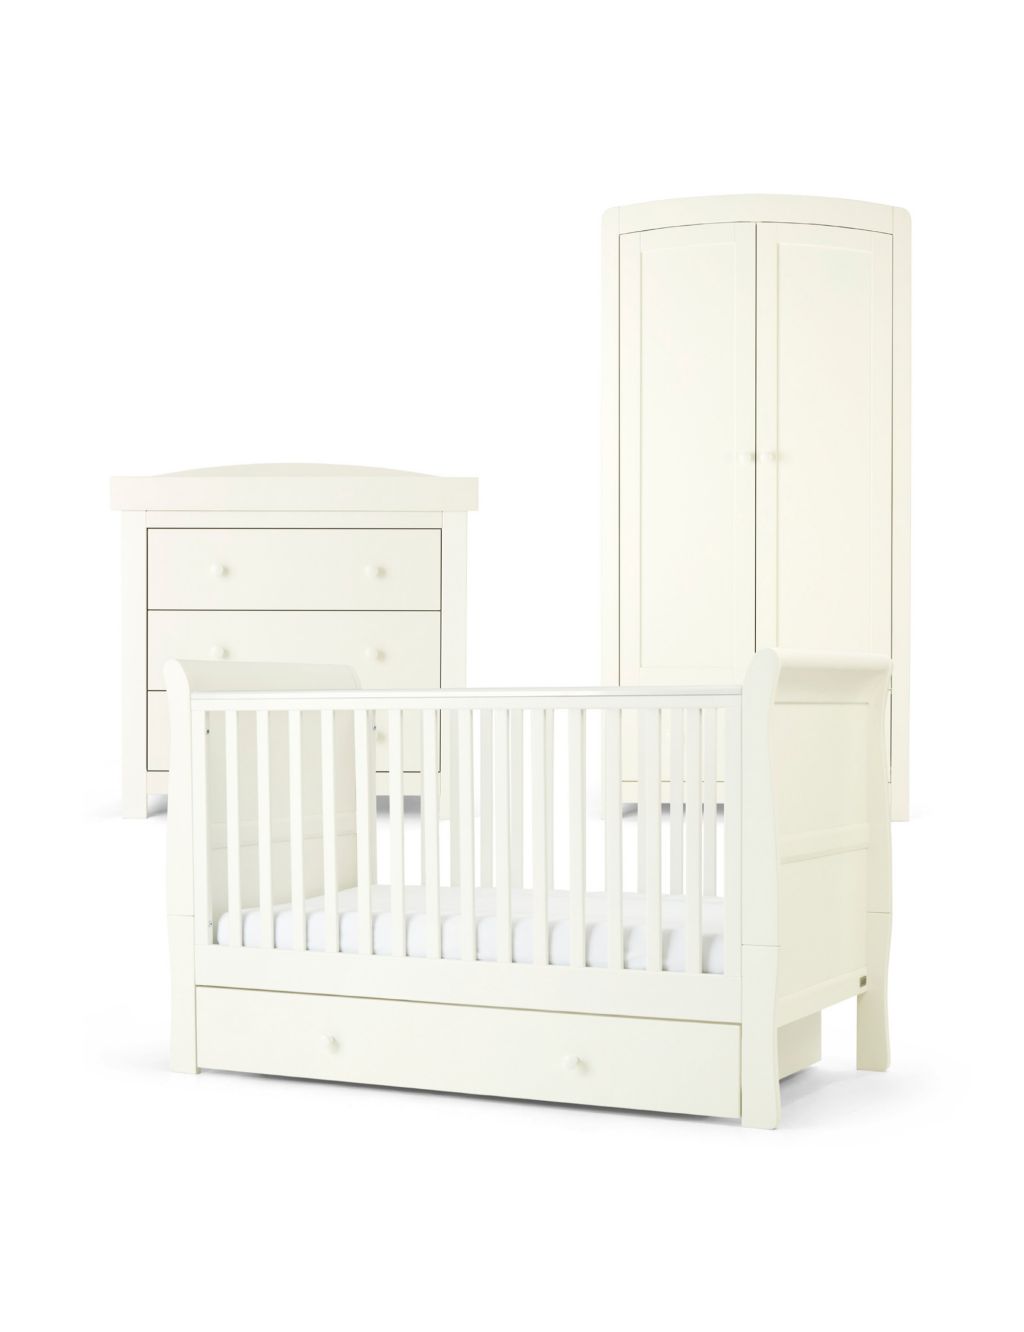 Mia 3 Piece Cotbed Range with Dresser and Wardrobe